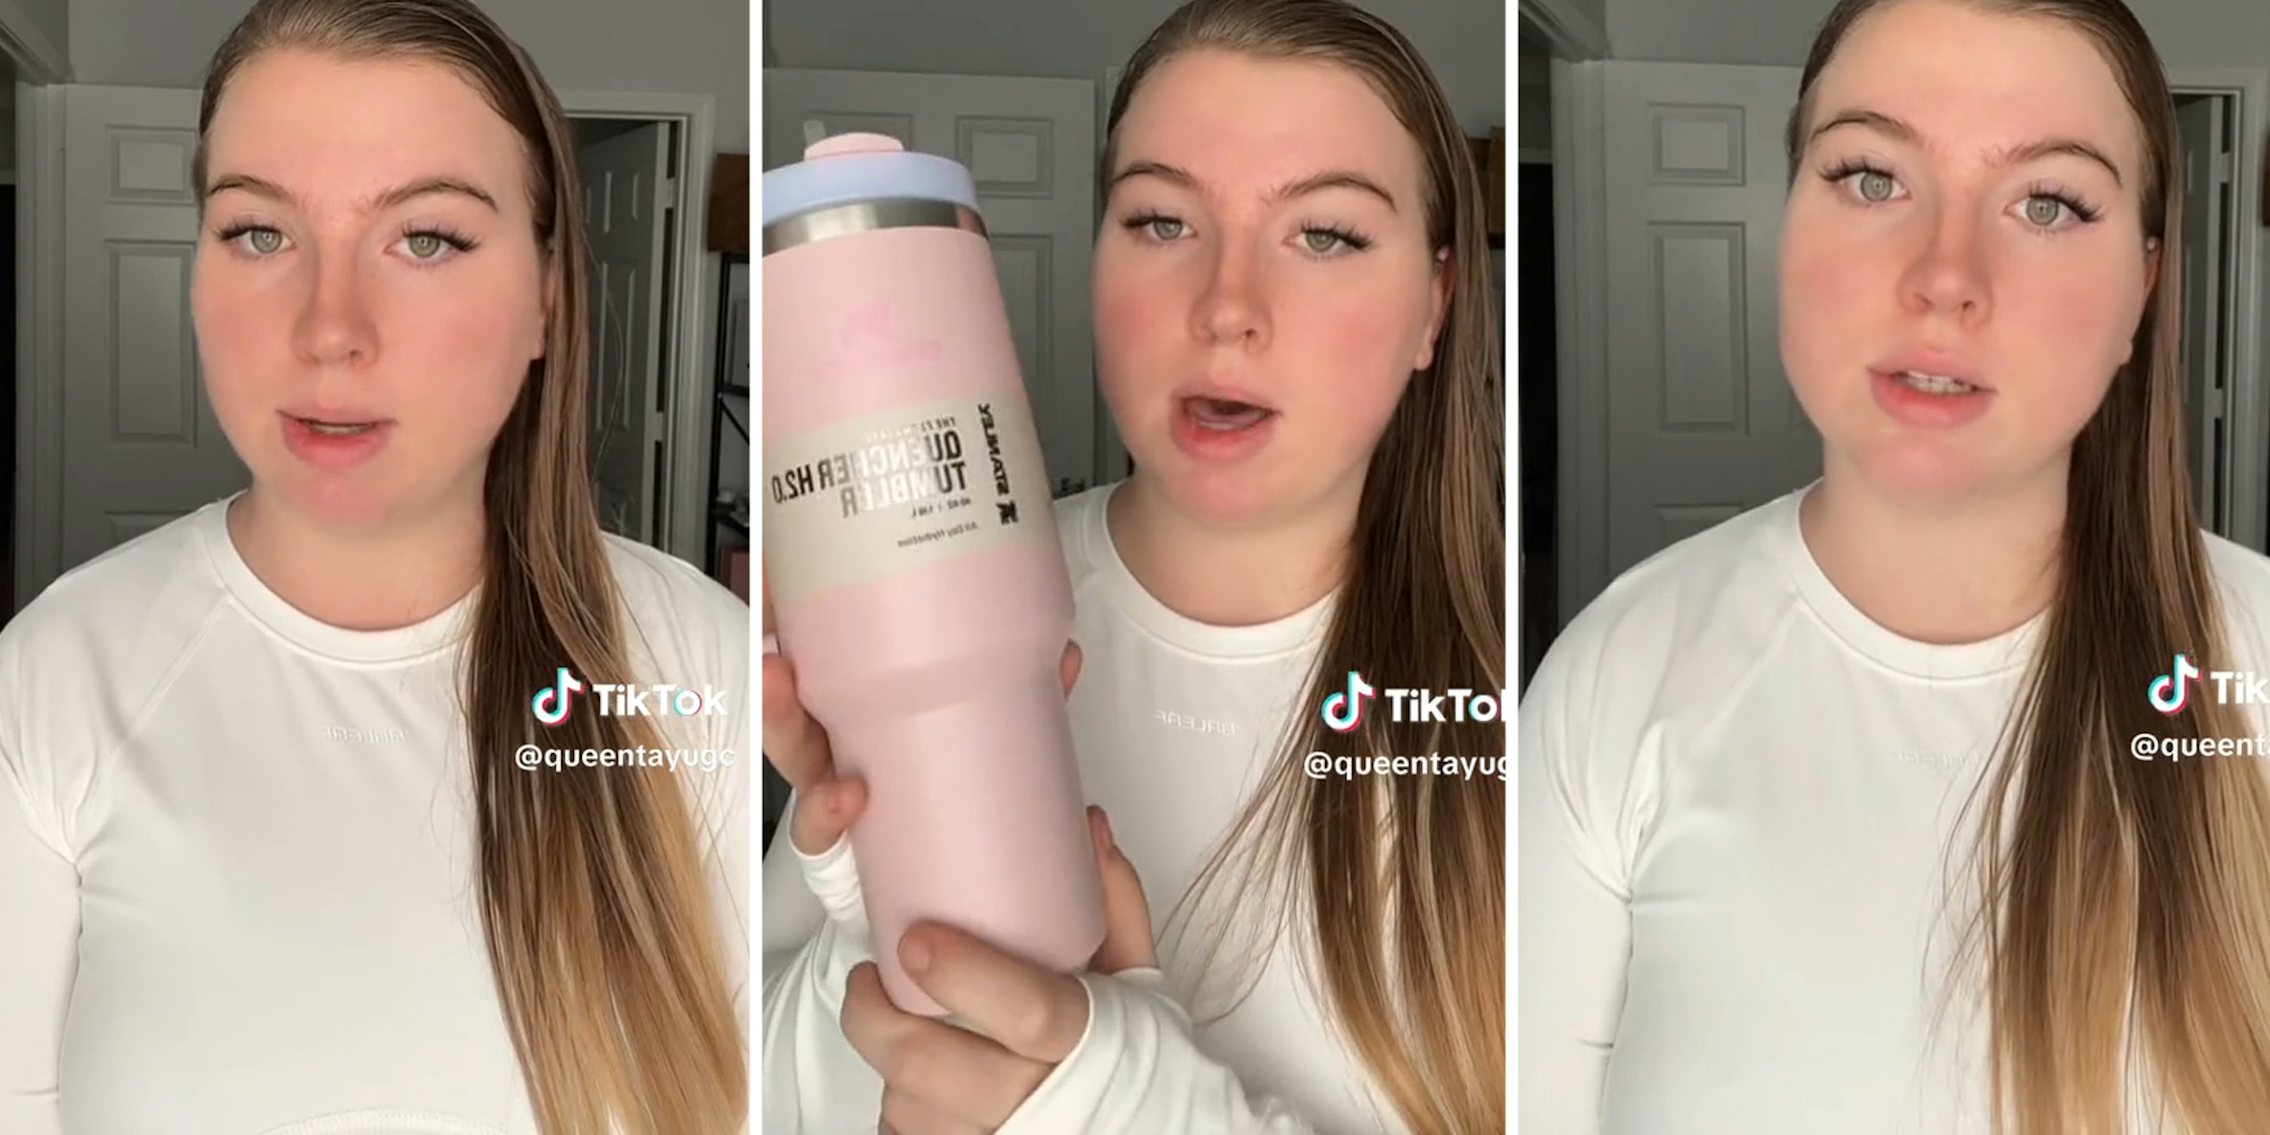 Customer Suspects Viral Pink Stanley Cup Is Fake